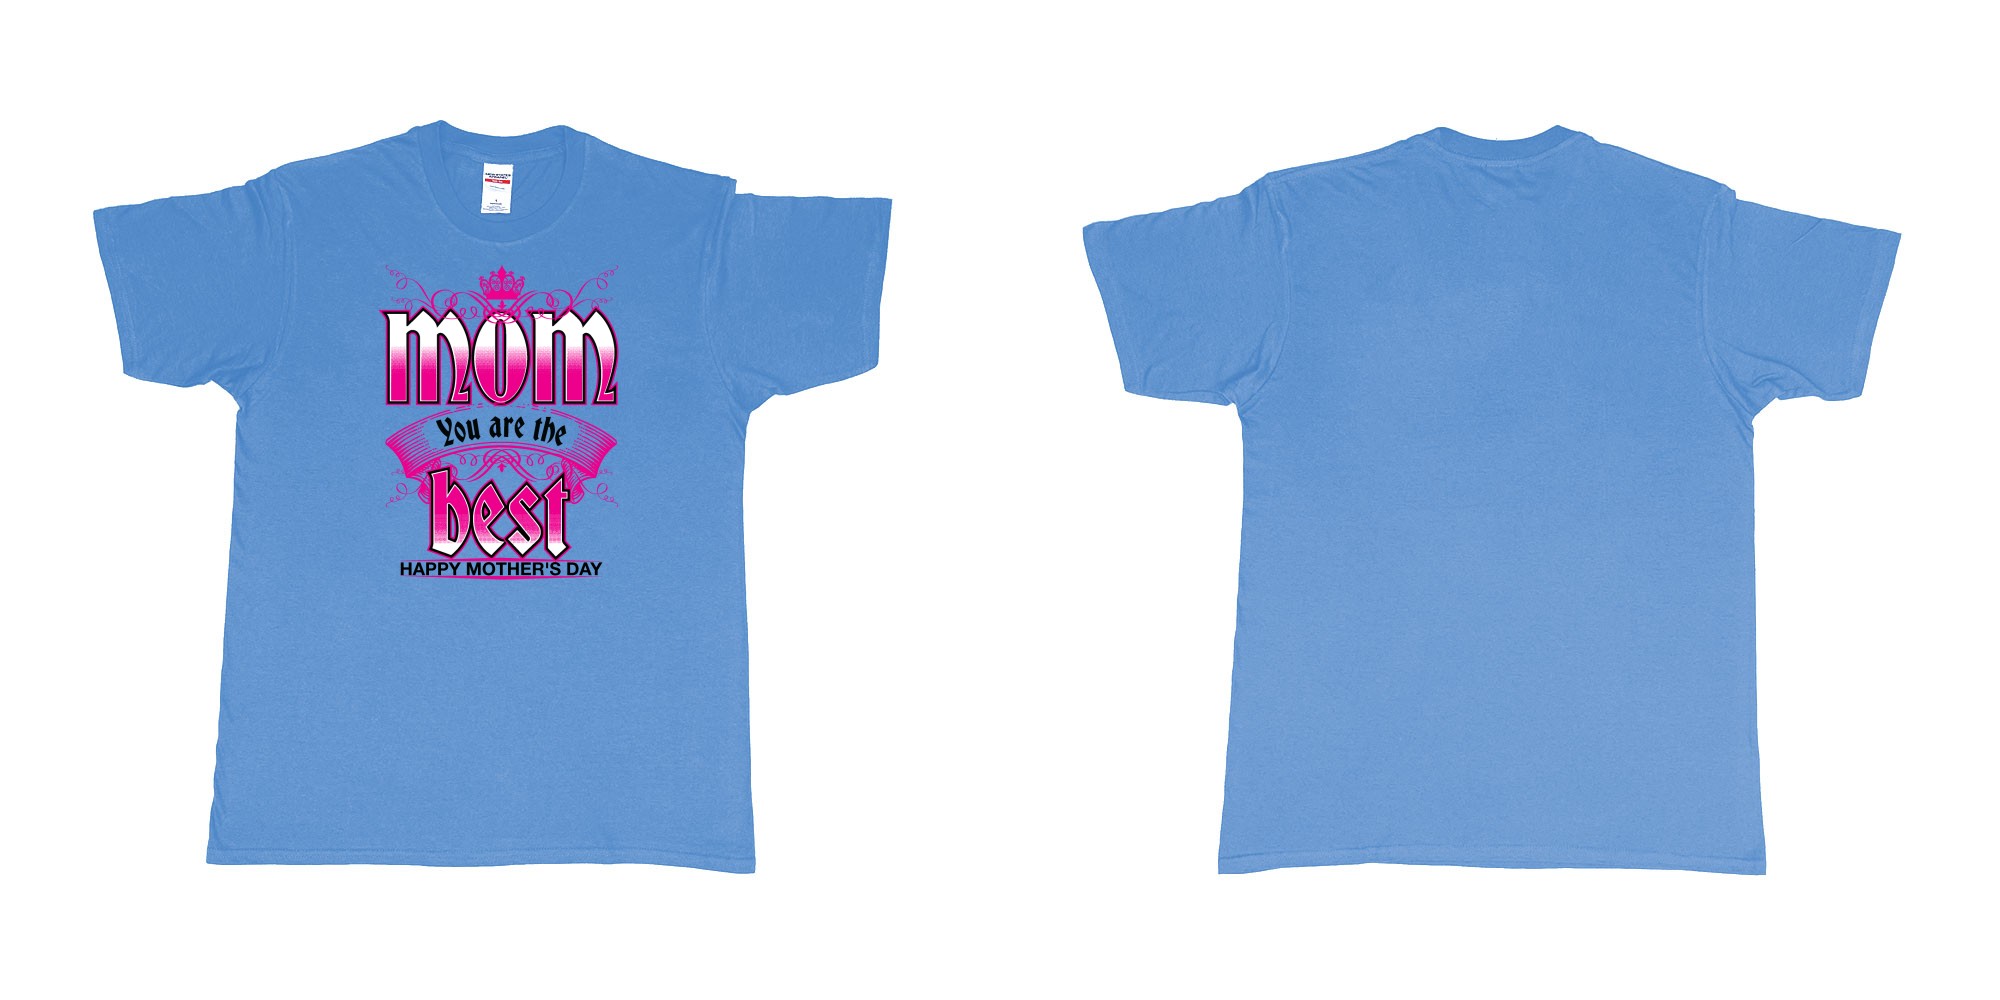 Custom tshirt design crown mom you are the best happy morthers day in fabric color carolina-blue choice your own text made in Bali by The Pirate Way